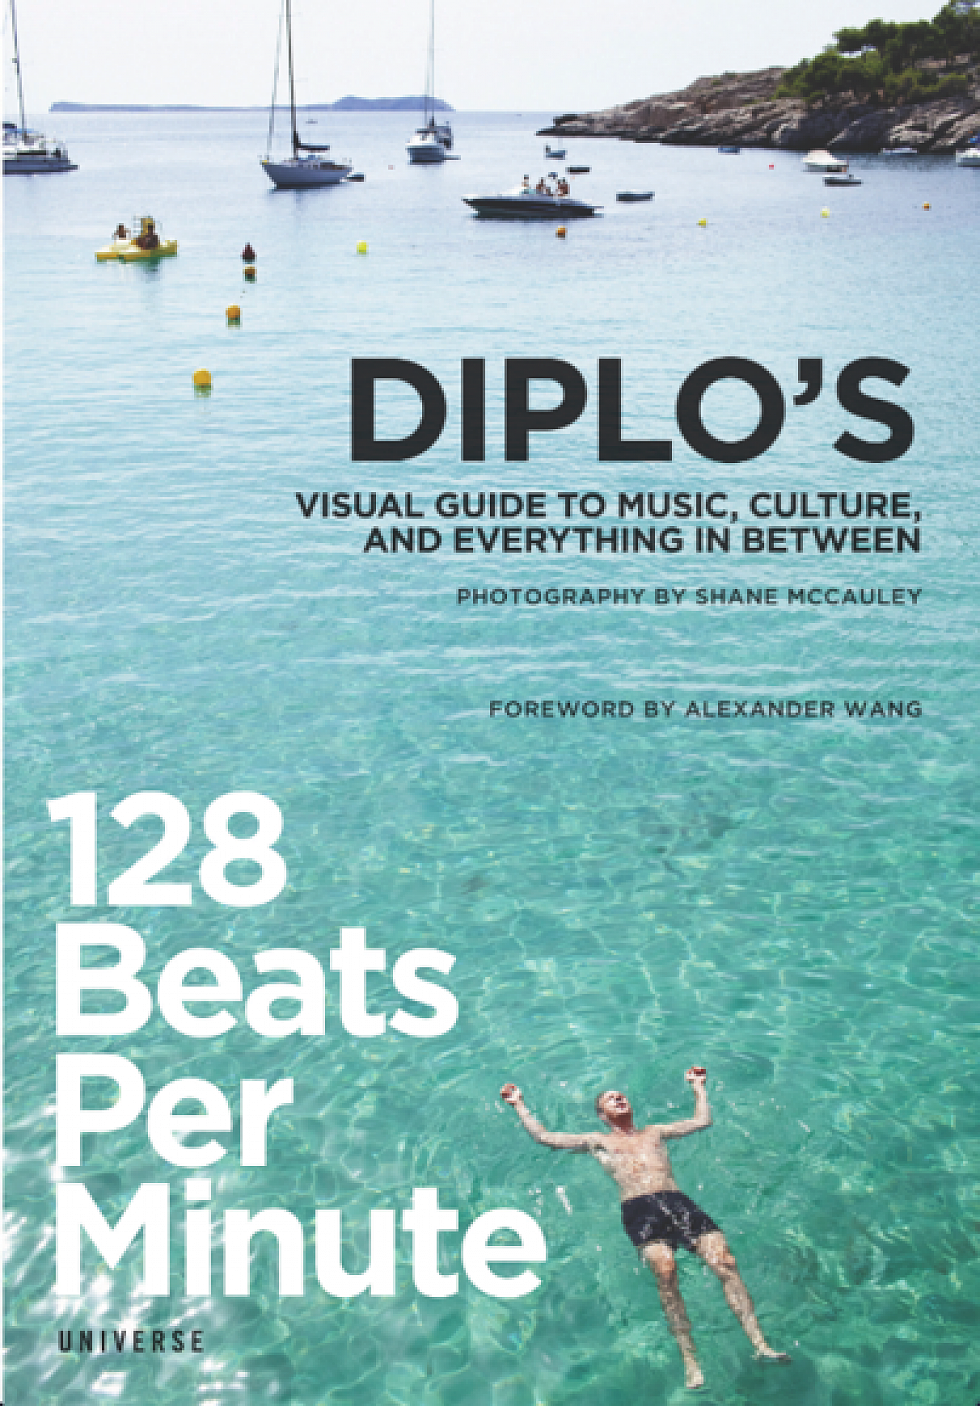 Diplo&#8217;s &#8220;128 Beats Per Minute&#8221; Book is available now